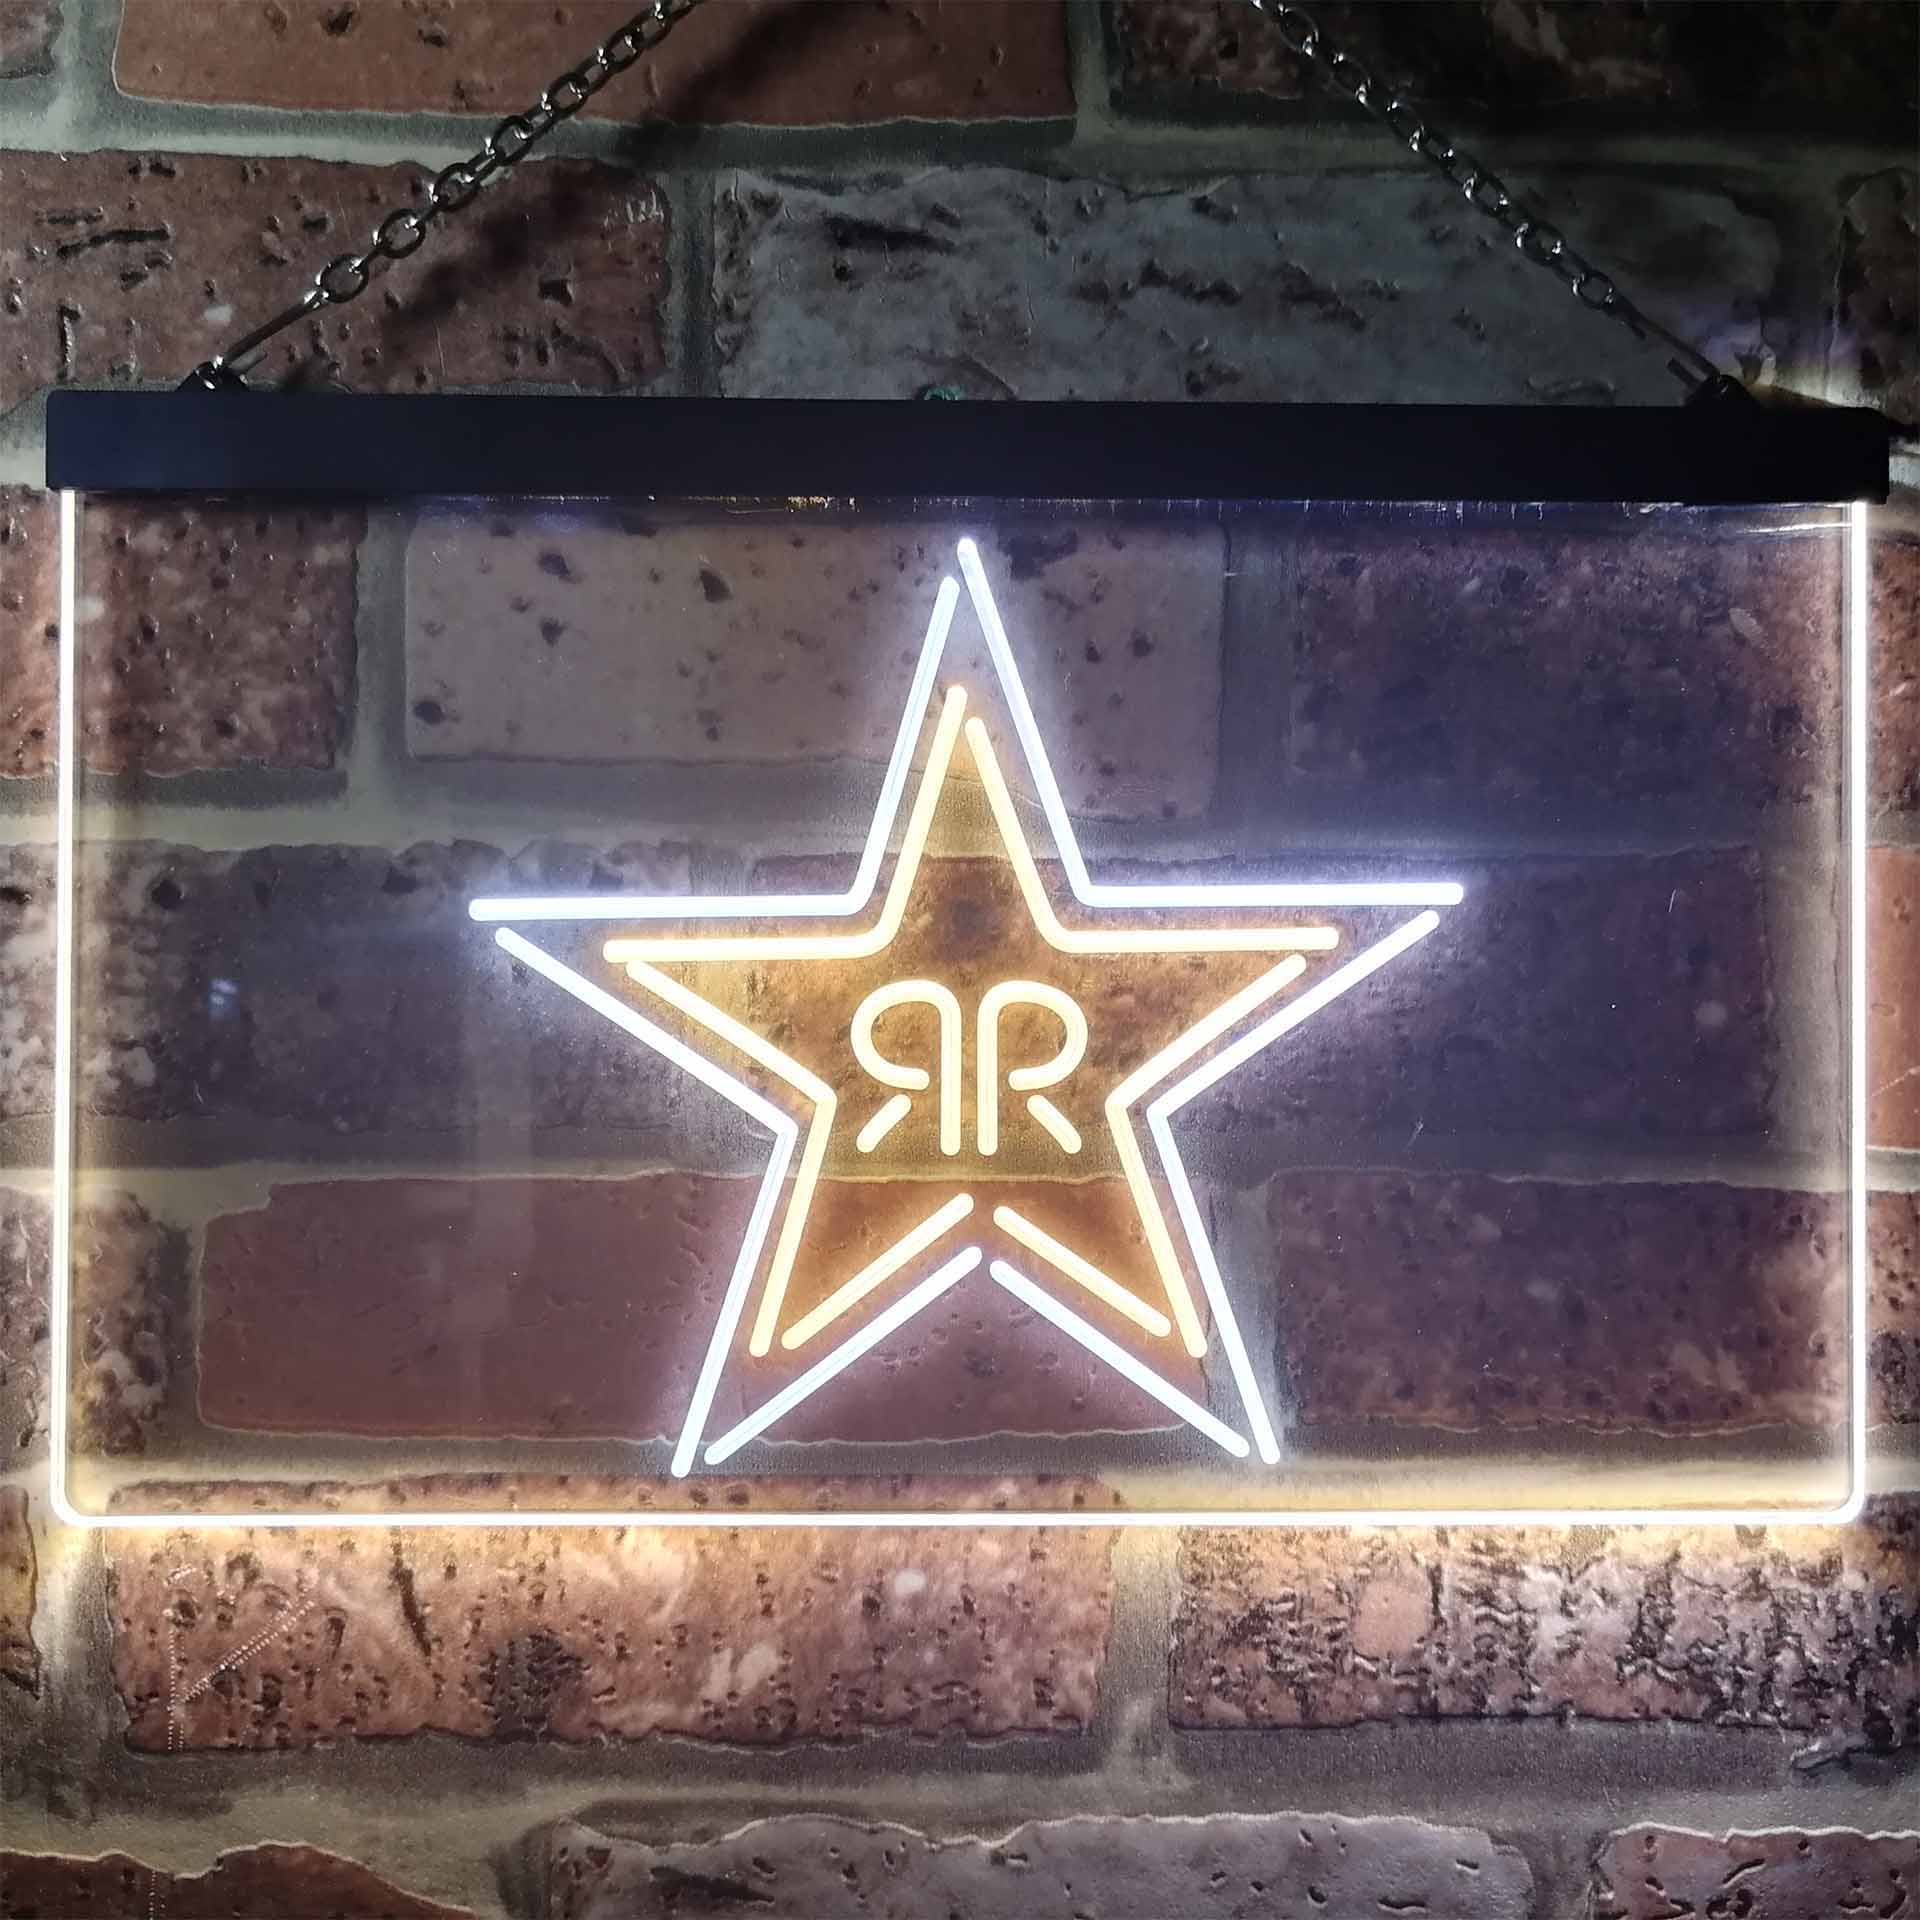 Rockstar Energy Dual Color LED Neon Sign ProLedSign